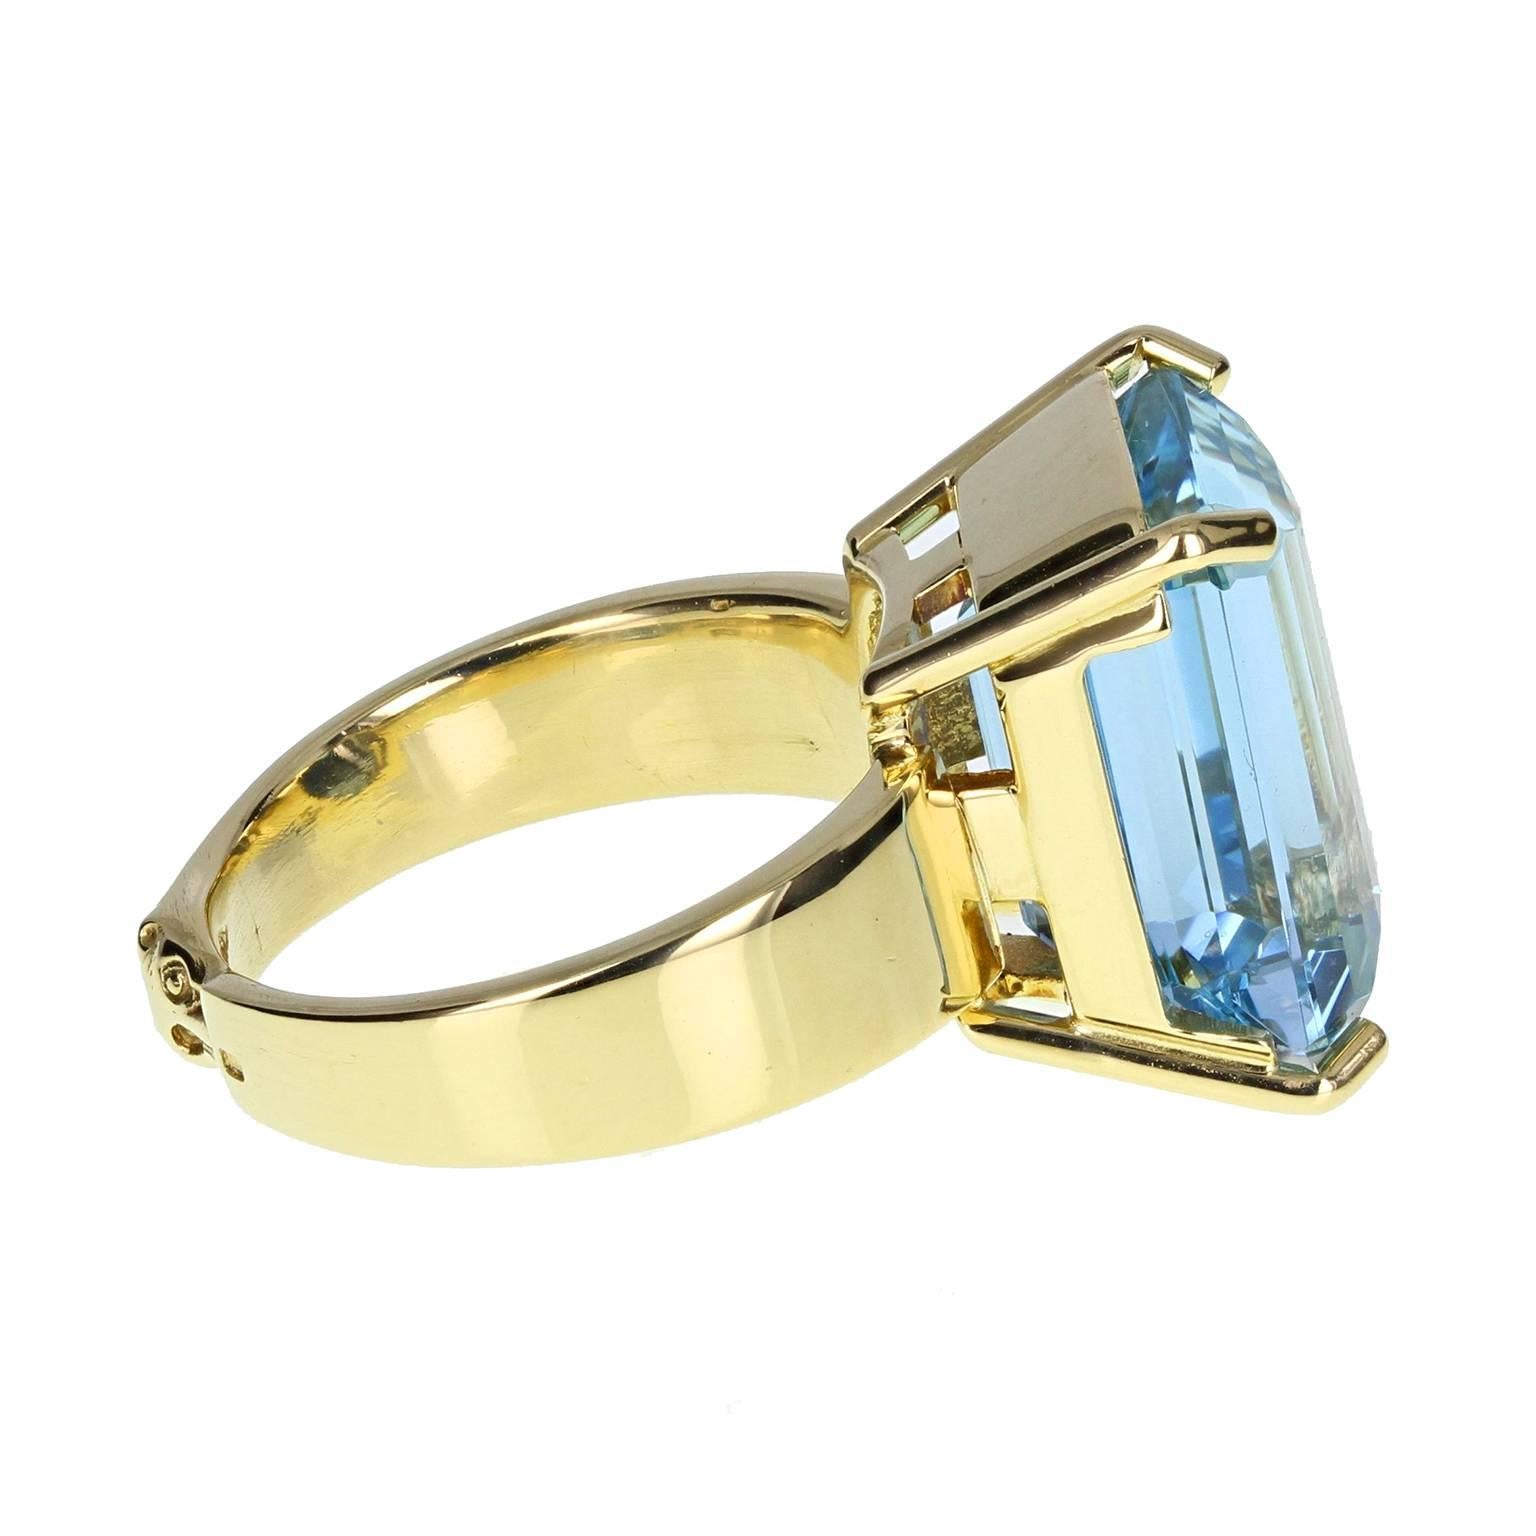 Modern Very Fine Quality Fancy Cut Aquamarine Gold Solitaire Ring